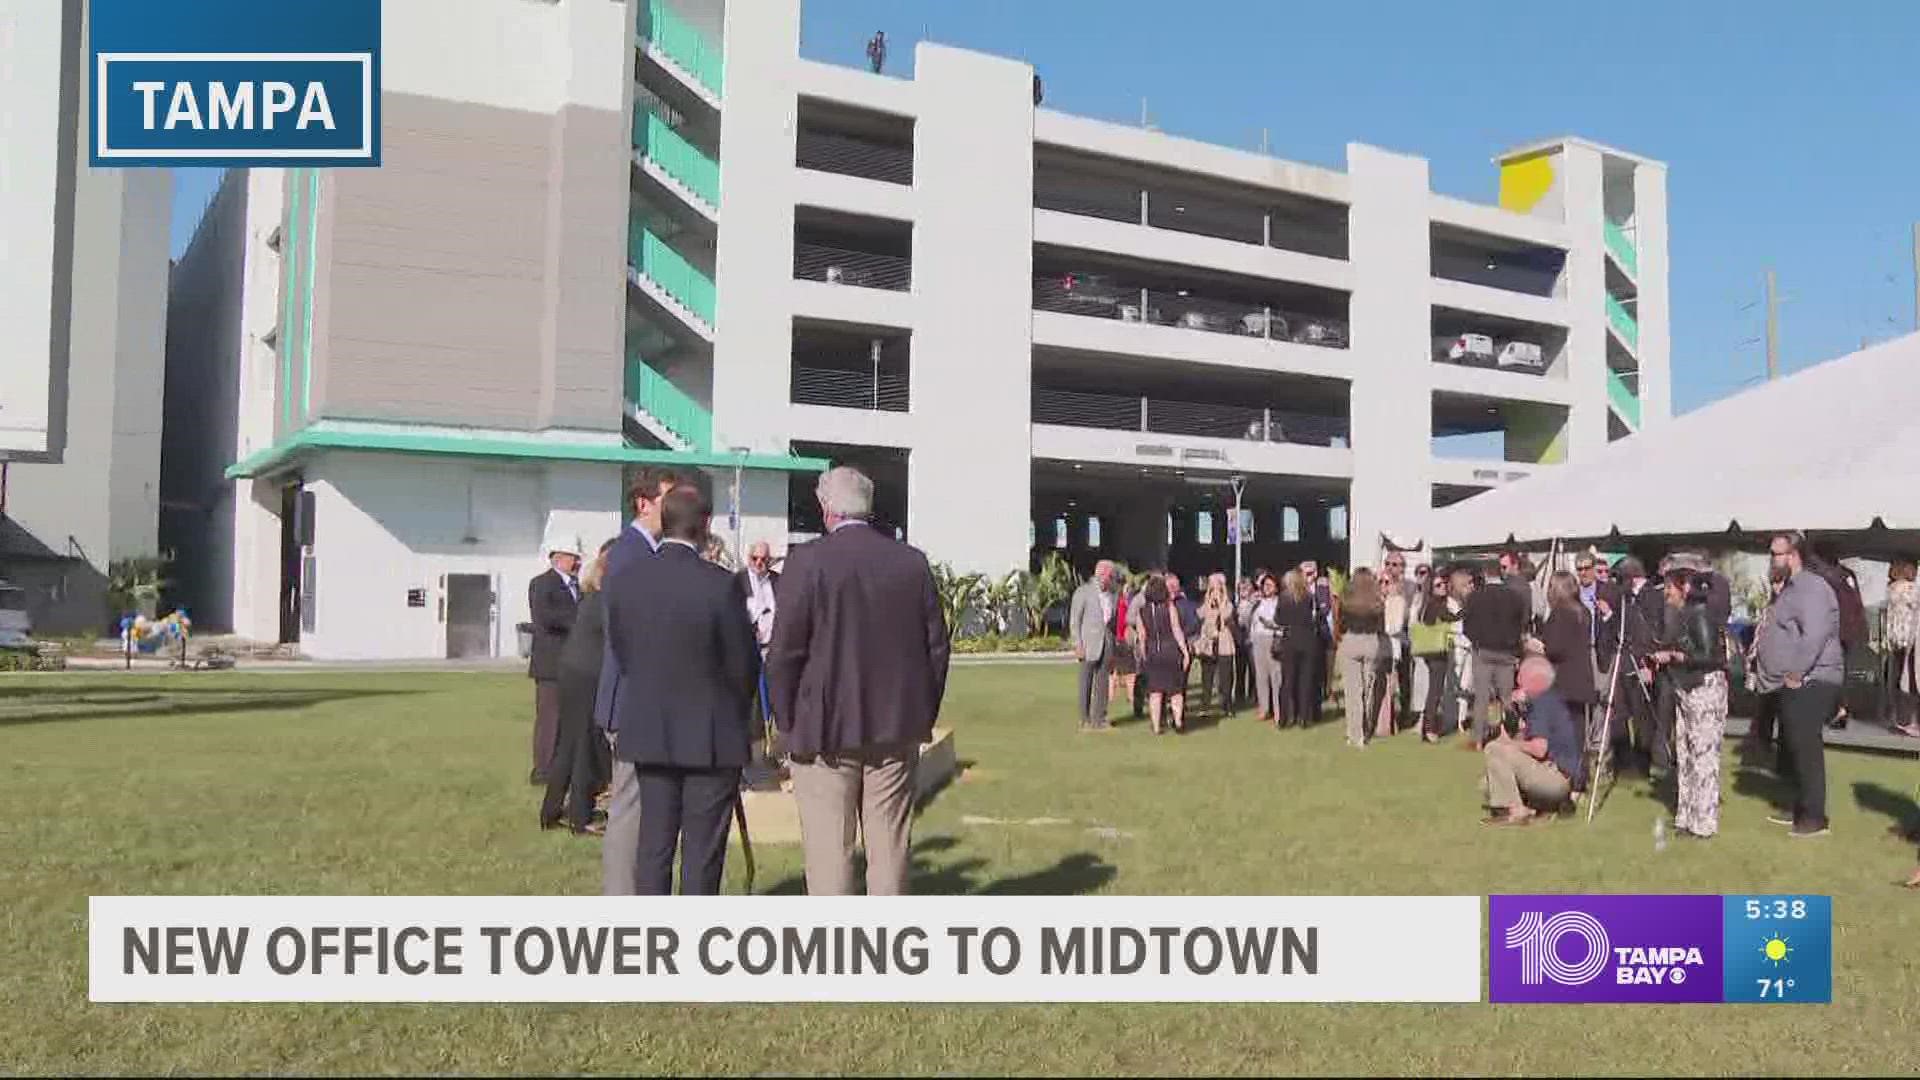 The new building will stand over 200 feet tall and will give tenants a 360-degree view of Tampa Bay.